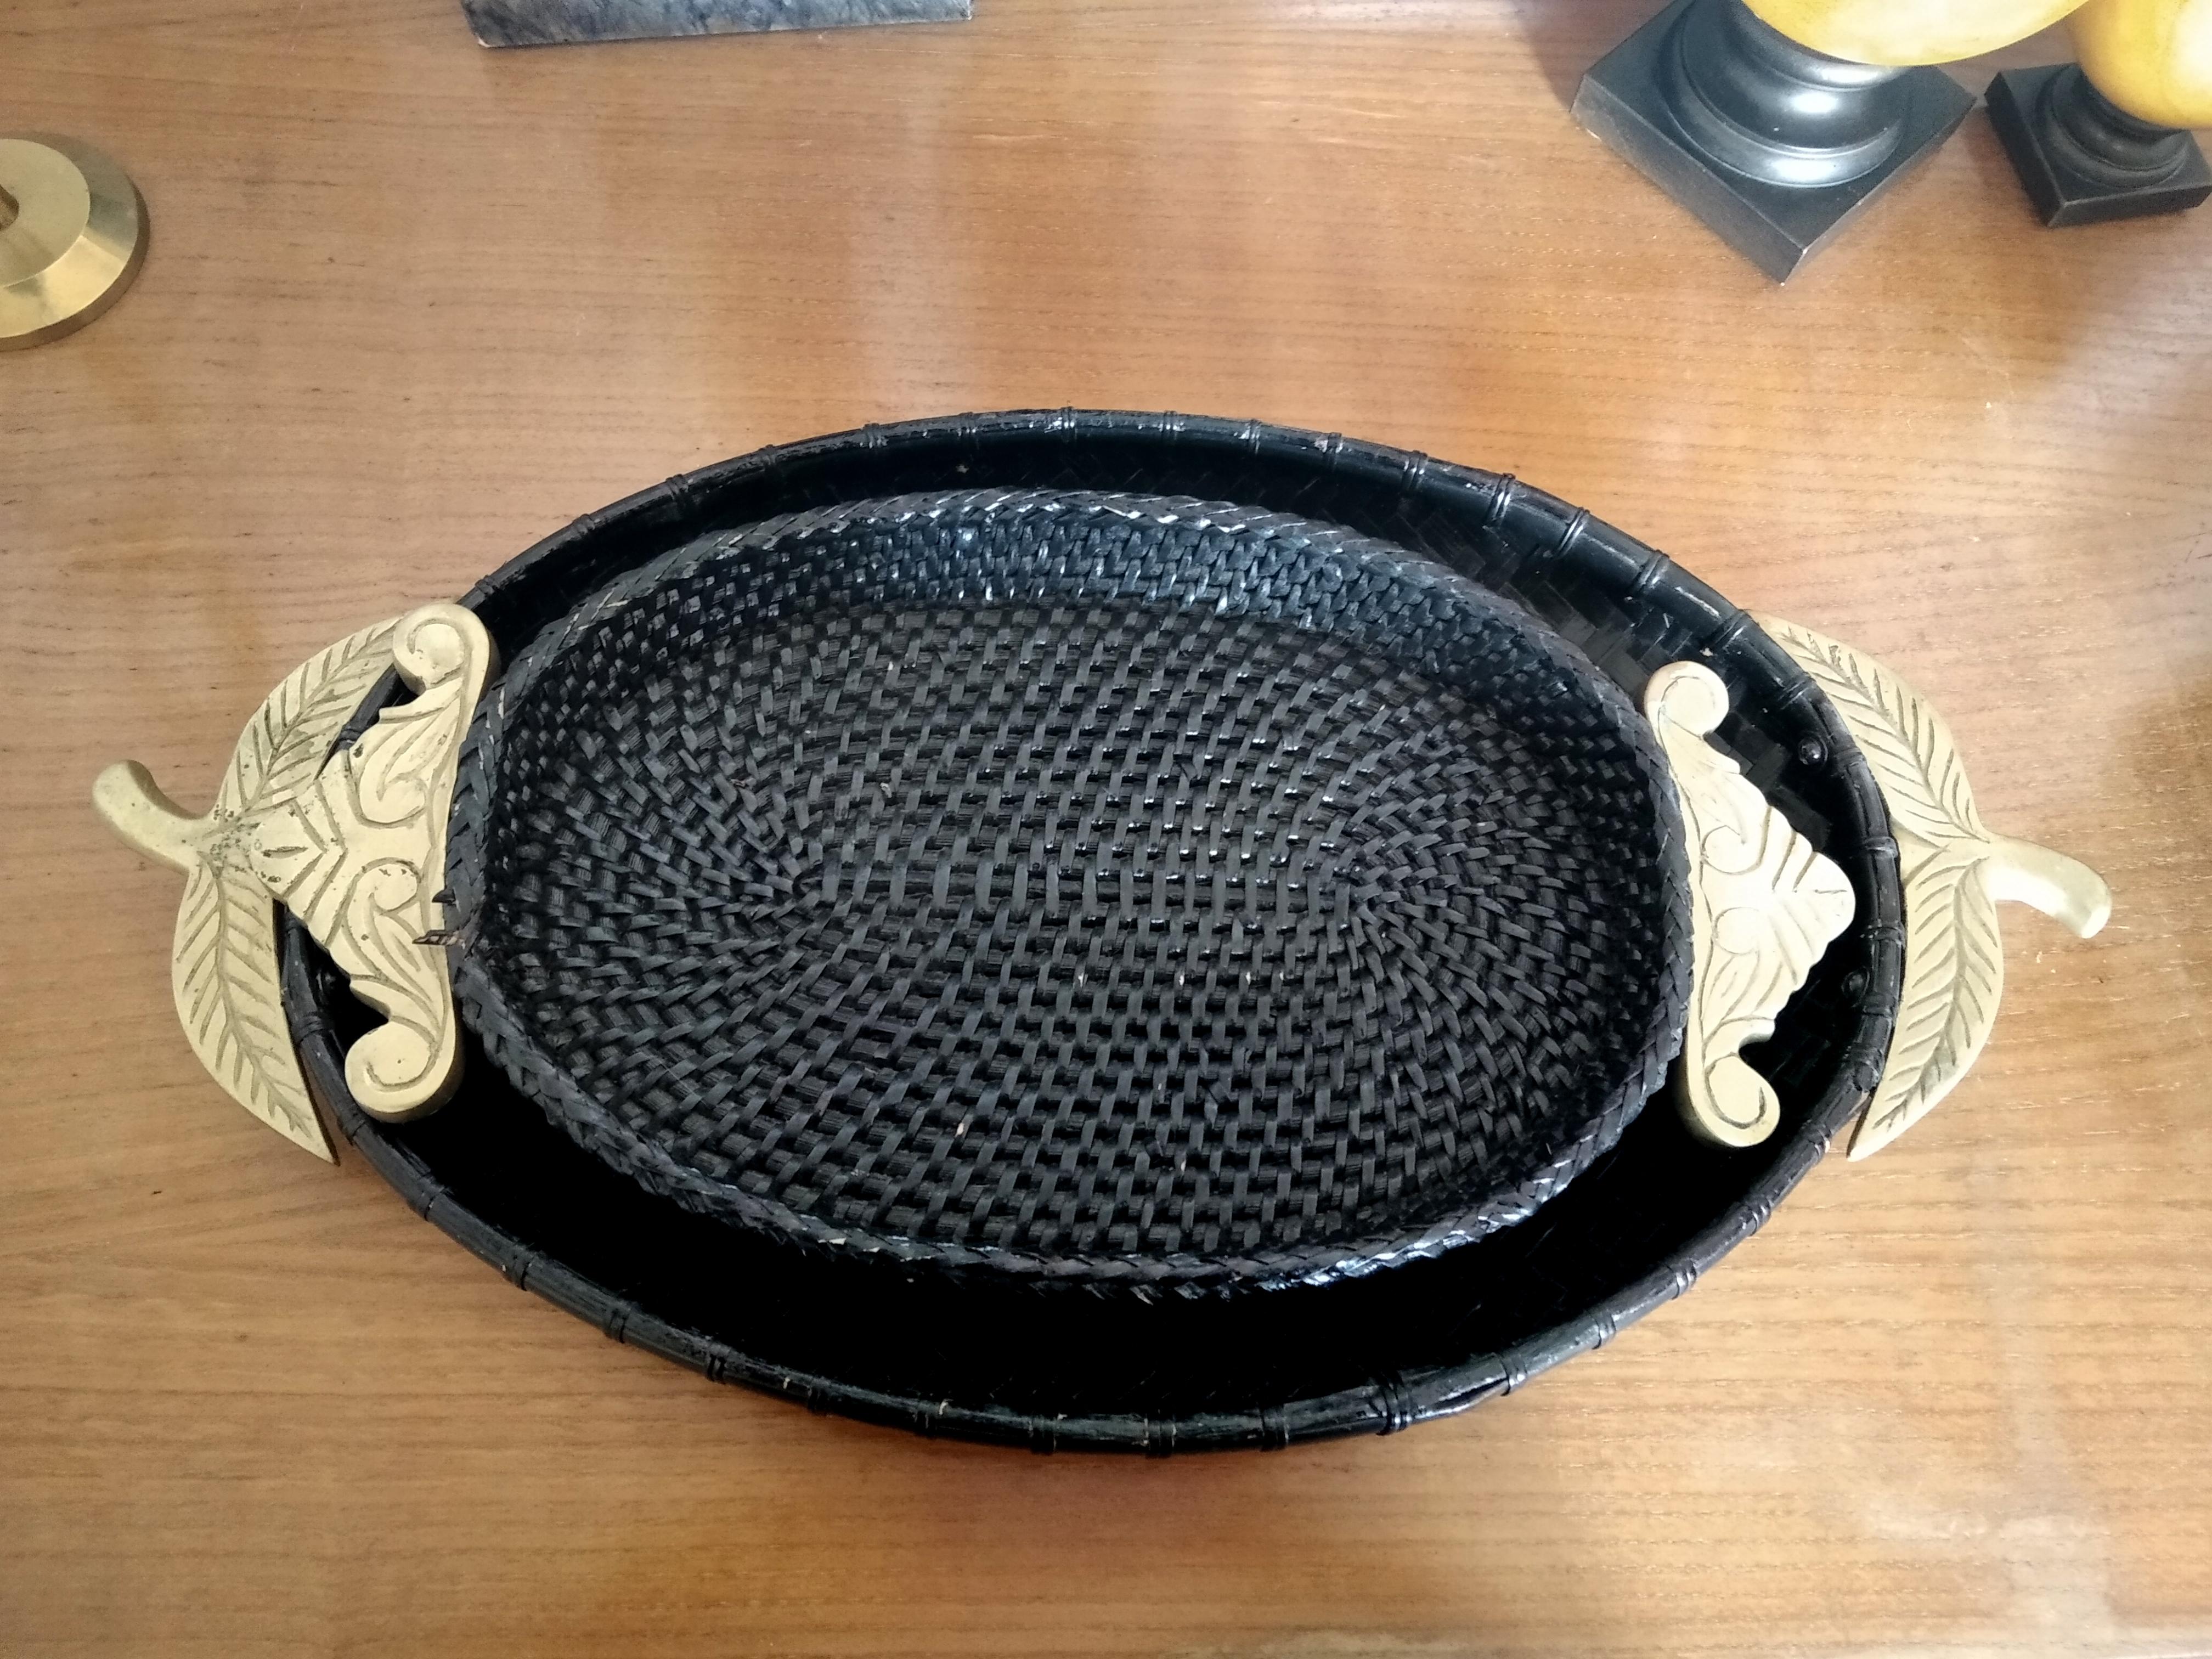 Trays Black Rattan and Brass Handles Oriental Origin 3 Pieces, Mid 20th Century For Sale 4